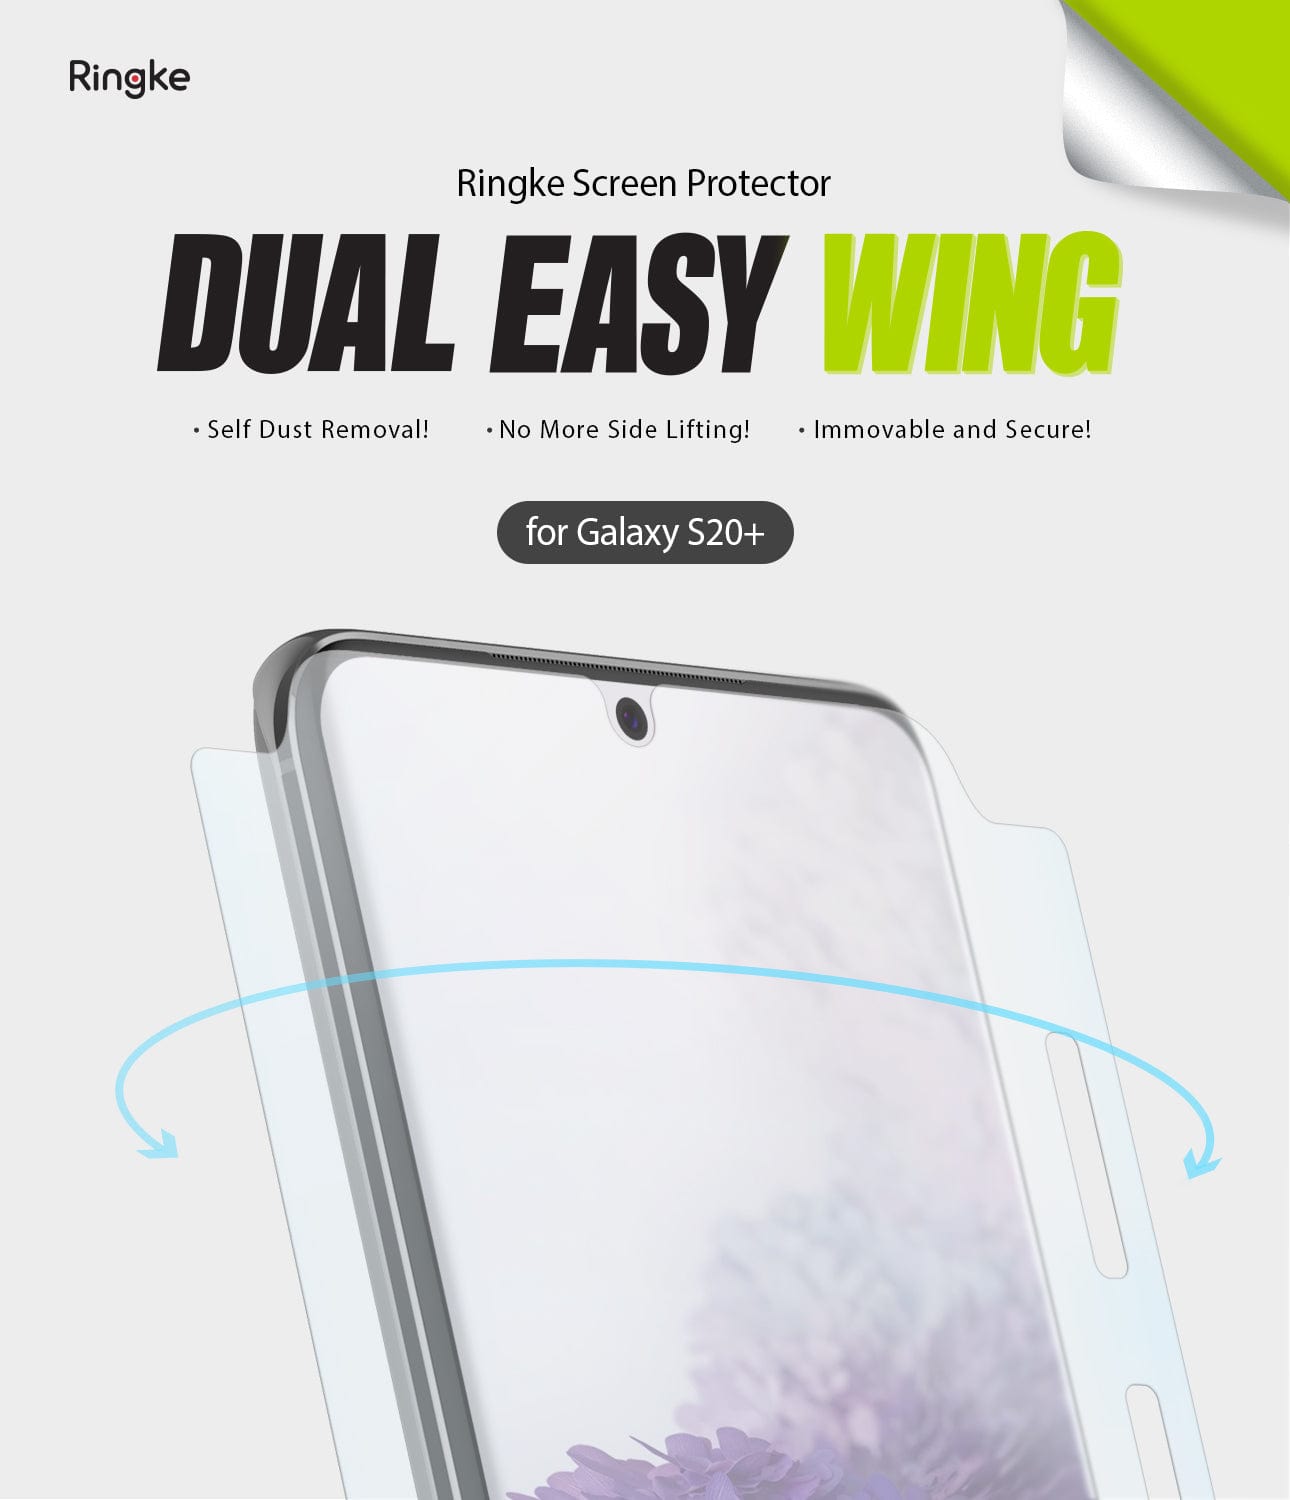 Samsung Galaxy S20 Plus Screen Protector | Dual Easy Wing